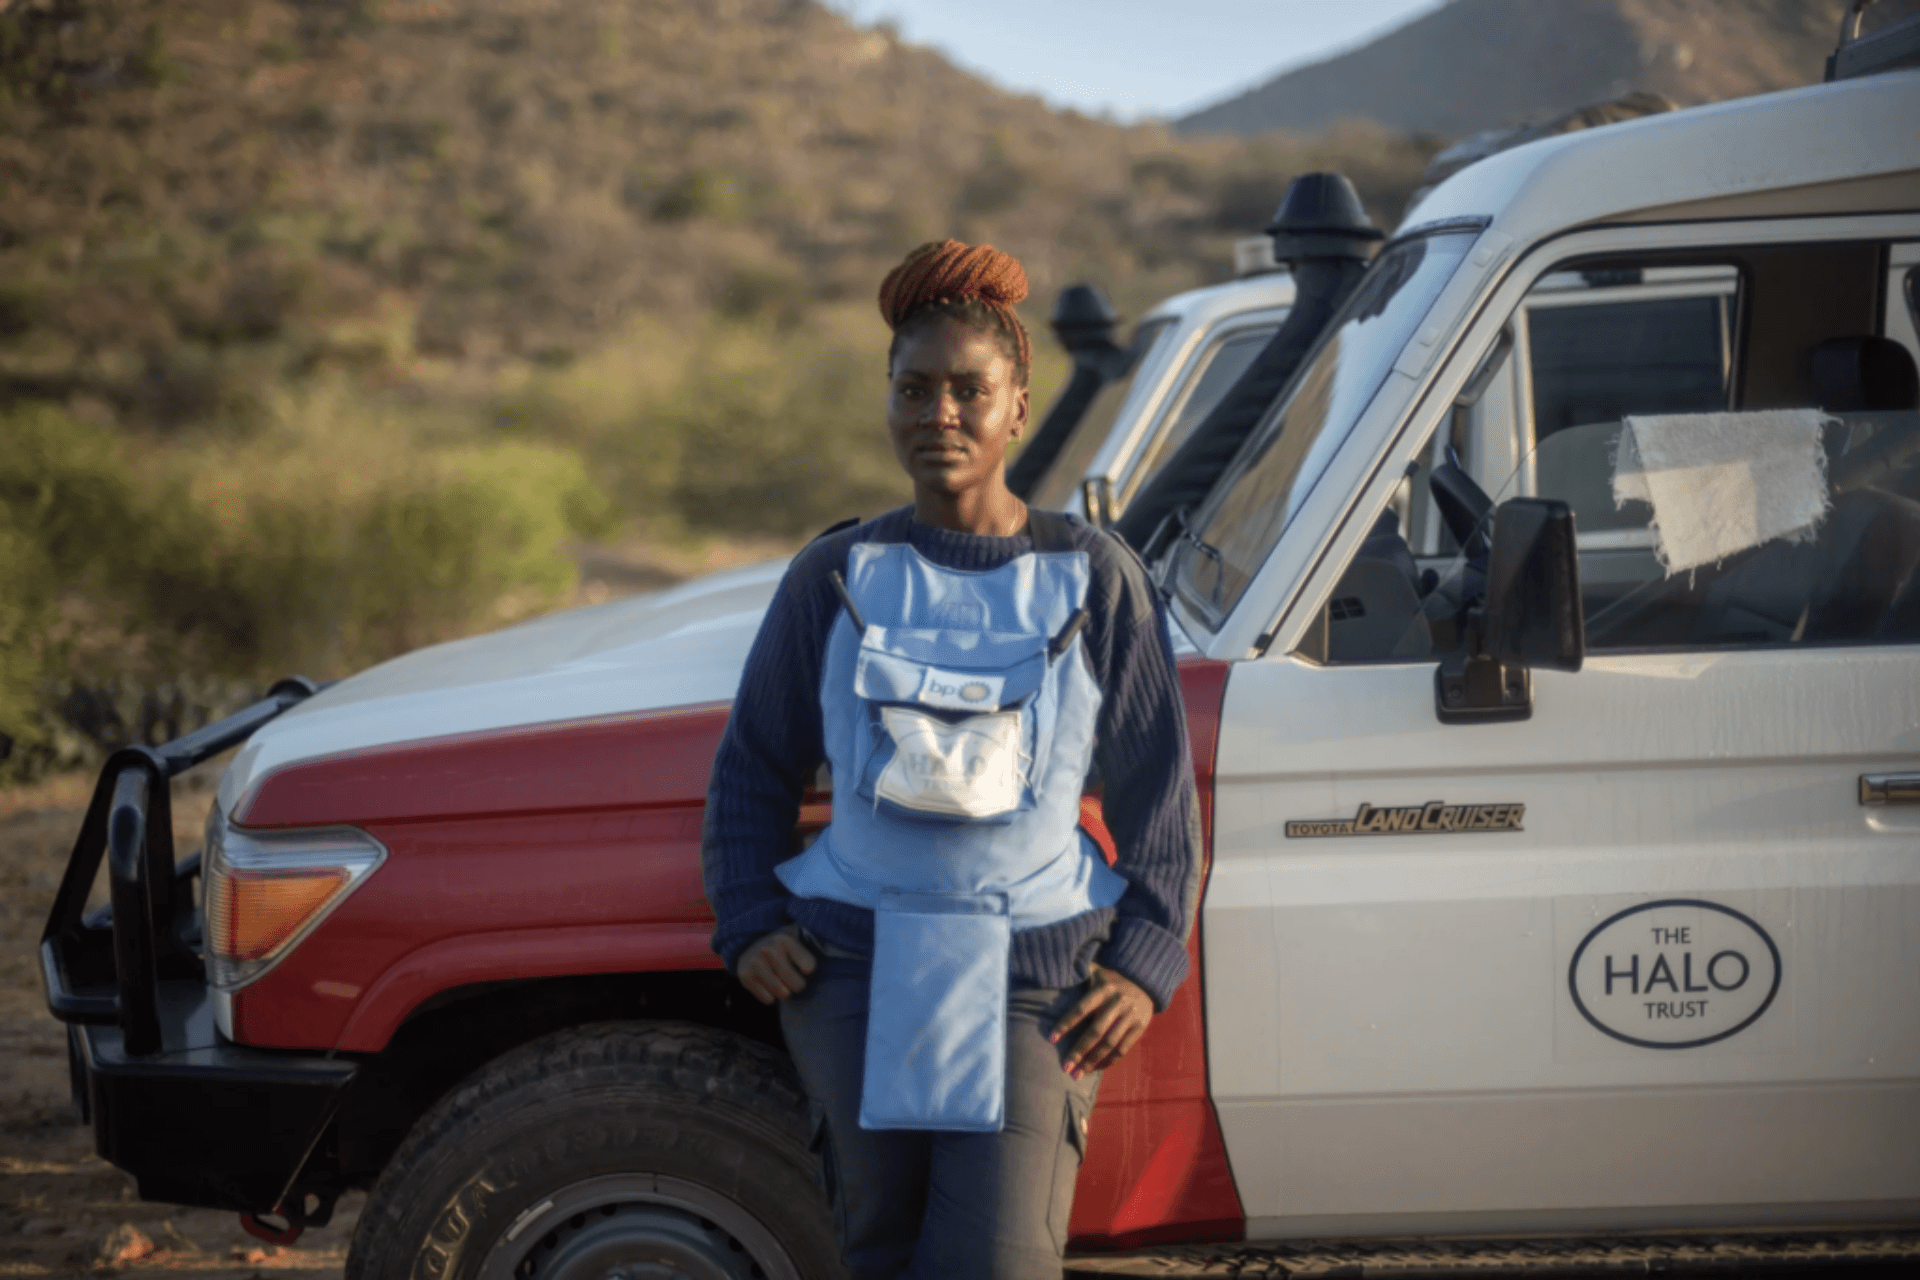 Making Angola safer – one landmine at a time